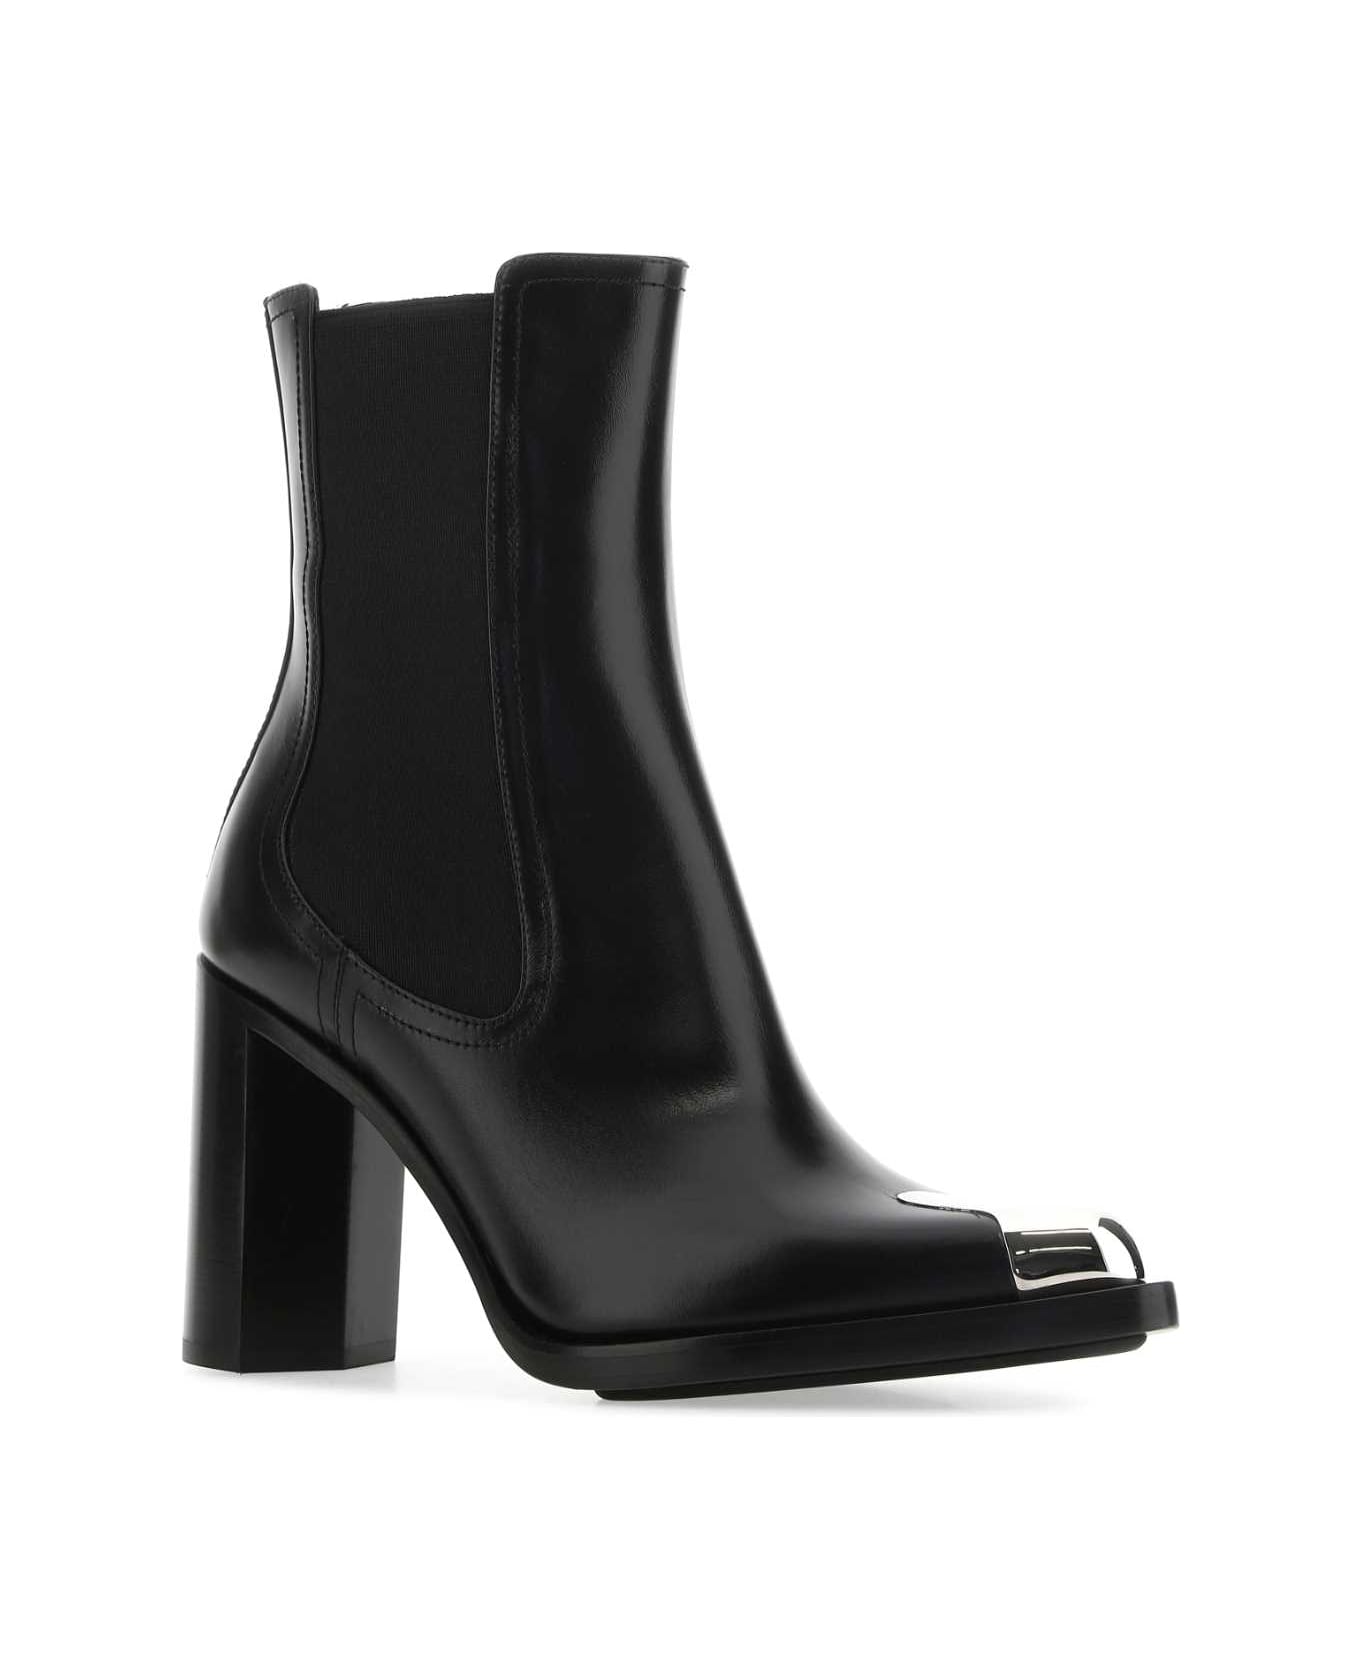 Alexander McQueen Black Leather Ankle Boots - 1081 ブーツ